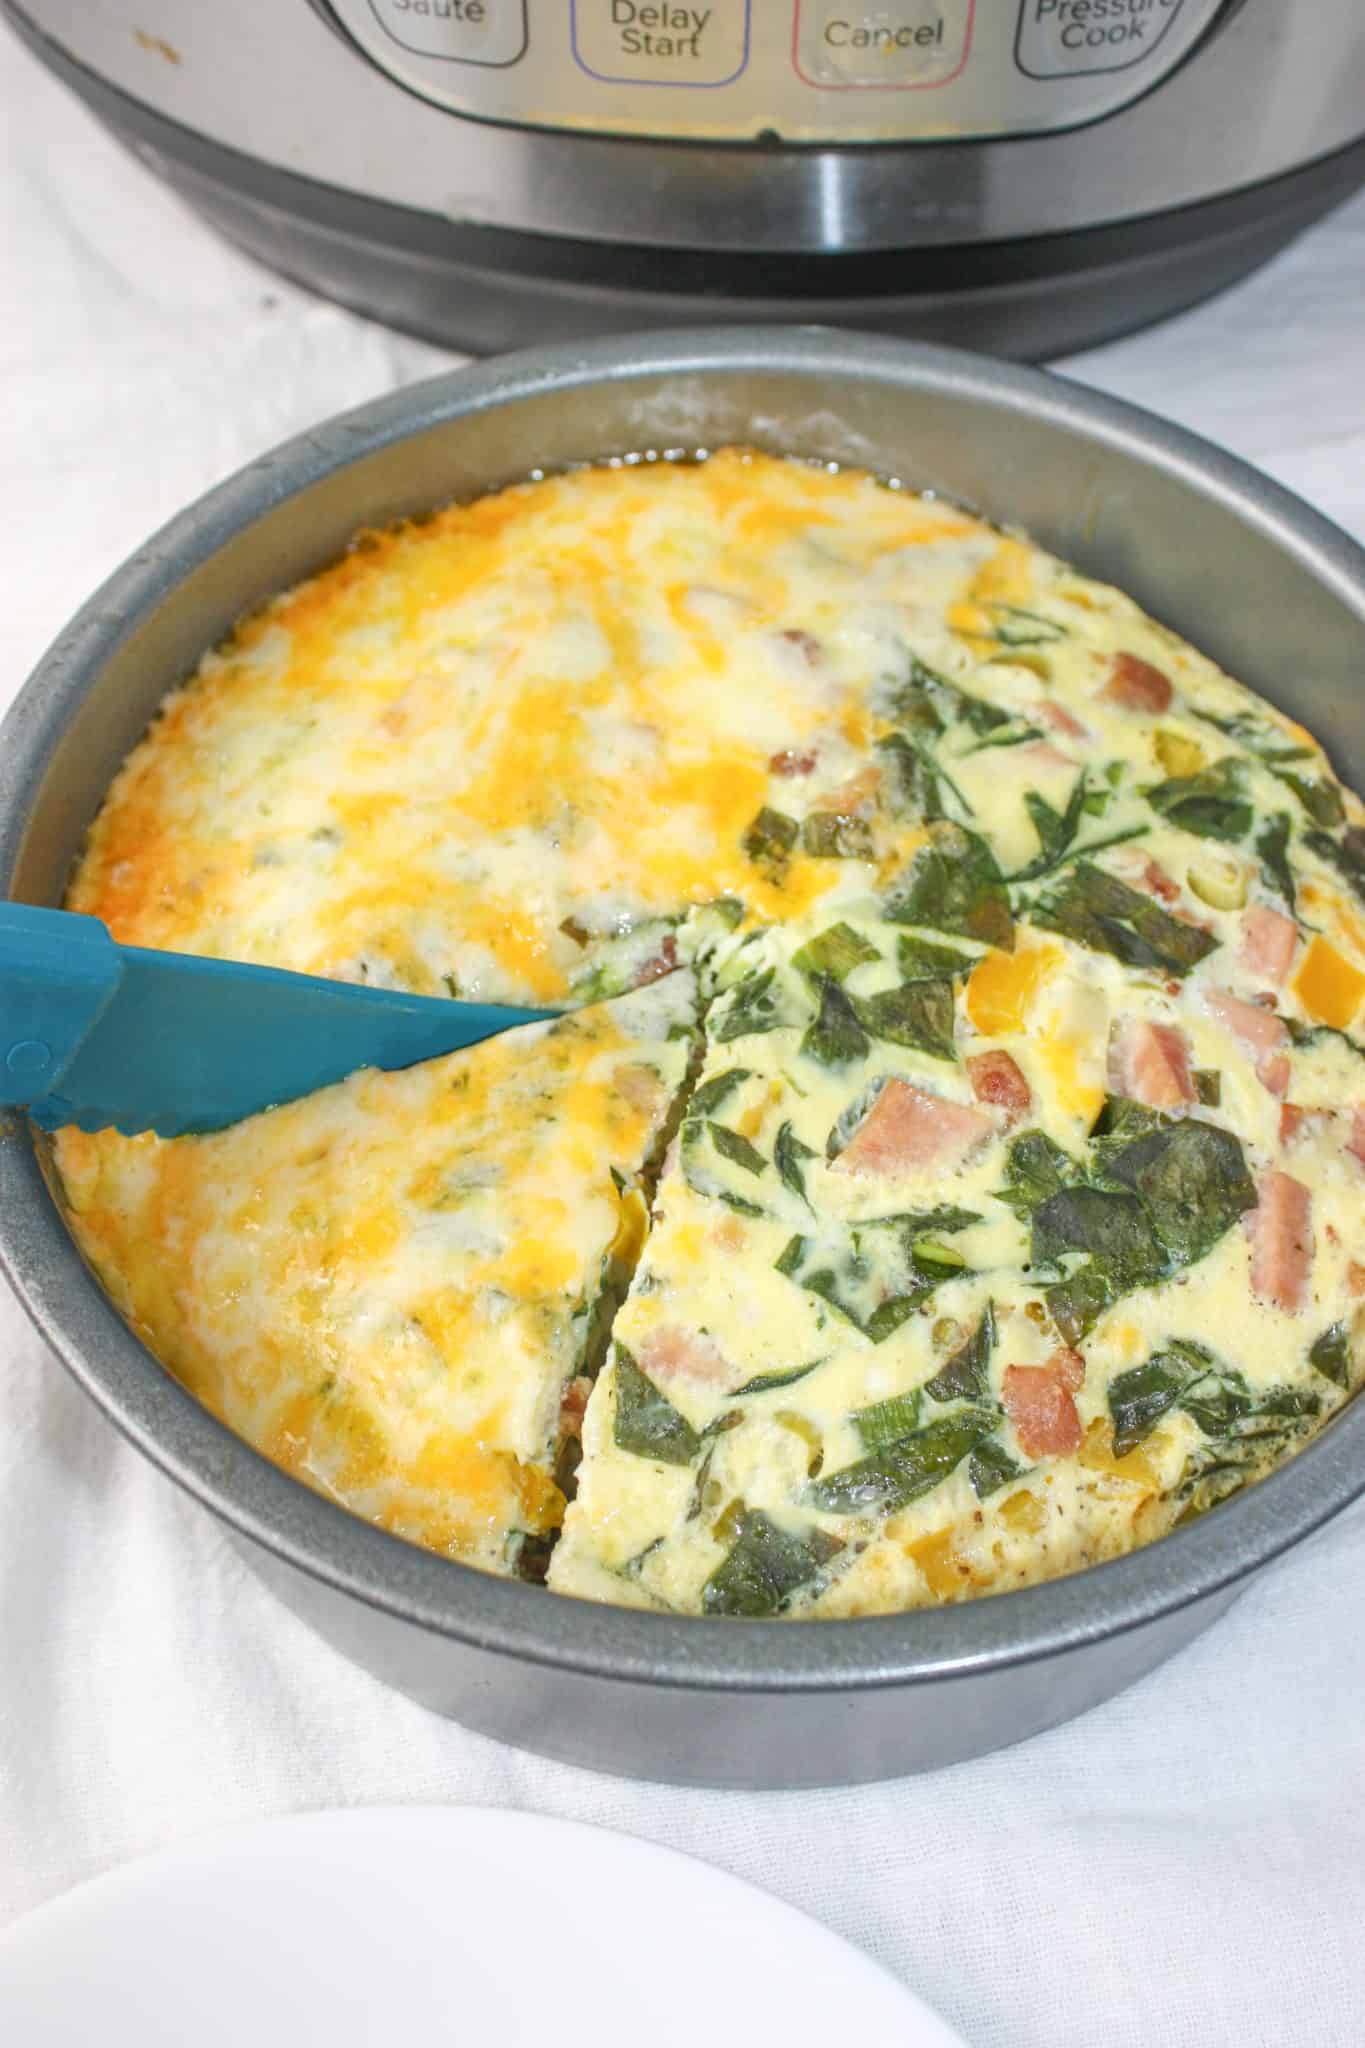 Instant Pot Crustless Quiche is a delicious breakfast or brunch option.  This pressure cooker recipe is loaded with ingredients and can easily be modified to suit your own tastes.